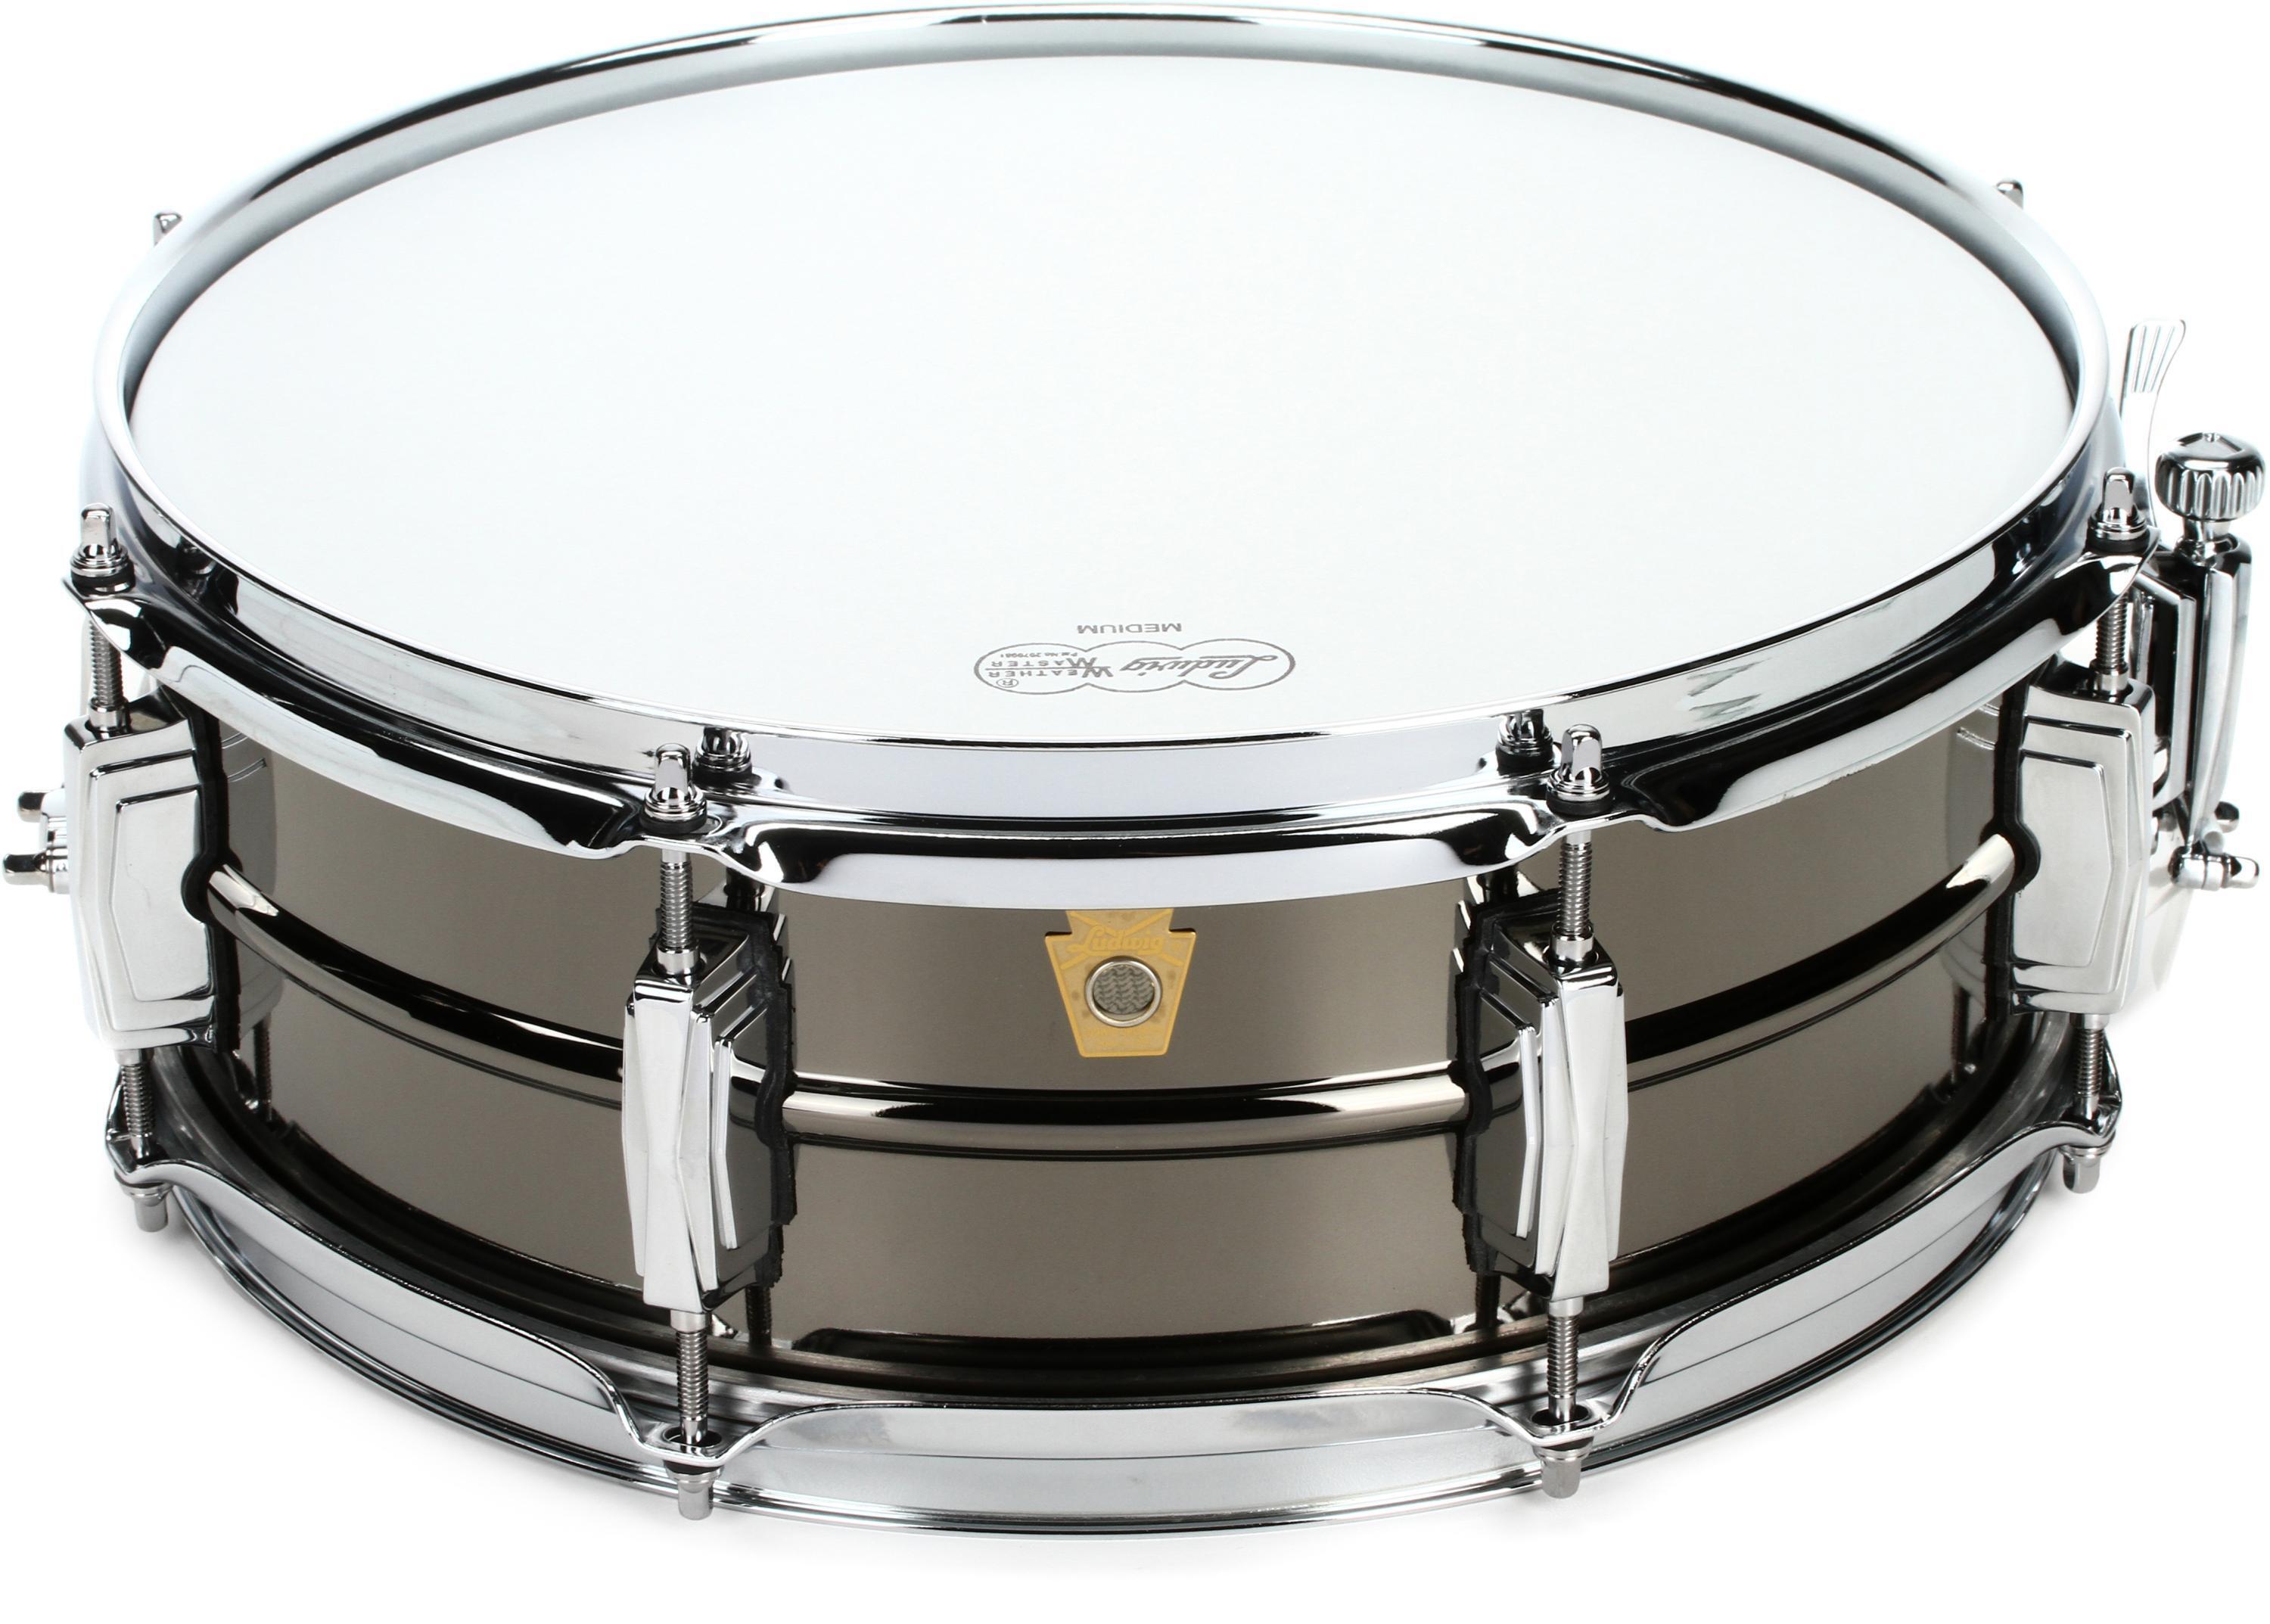 Ludwig Black Beauty Snare Drum - 5 x 14-inch - Black Nickel with 8-Lugs